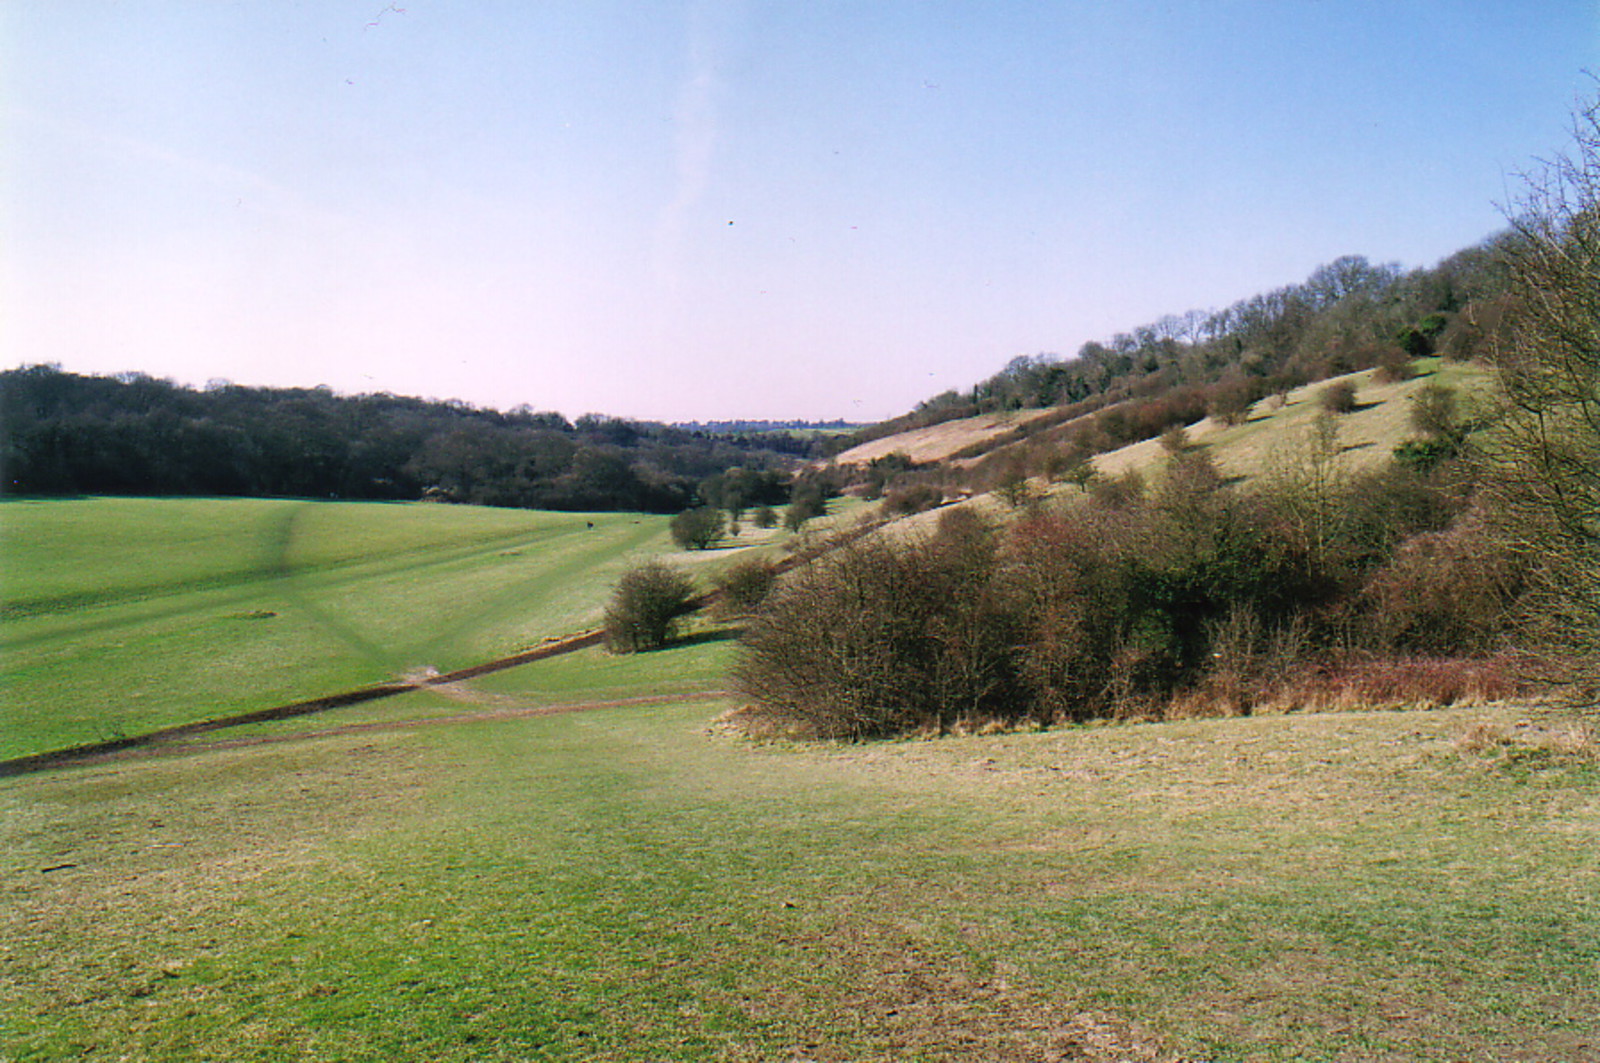 The view towards Farthing Downs